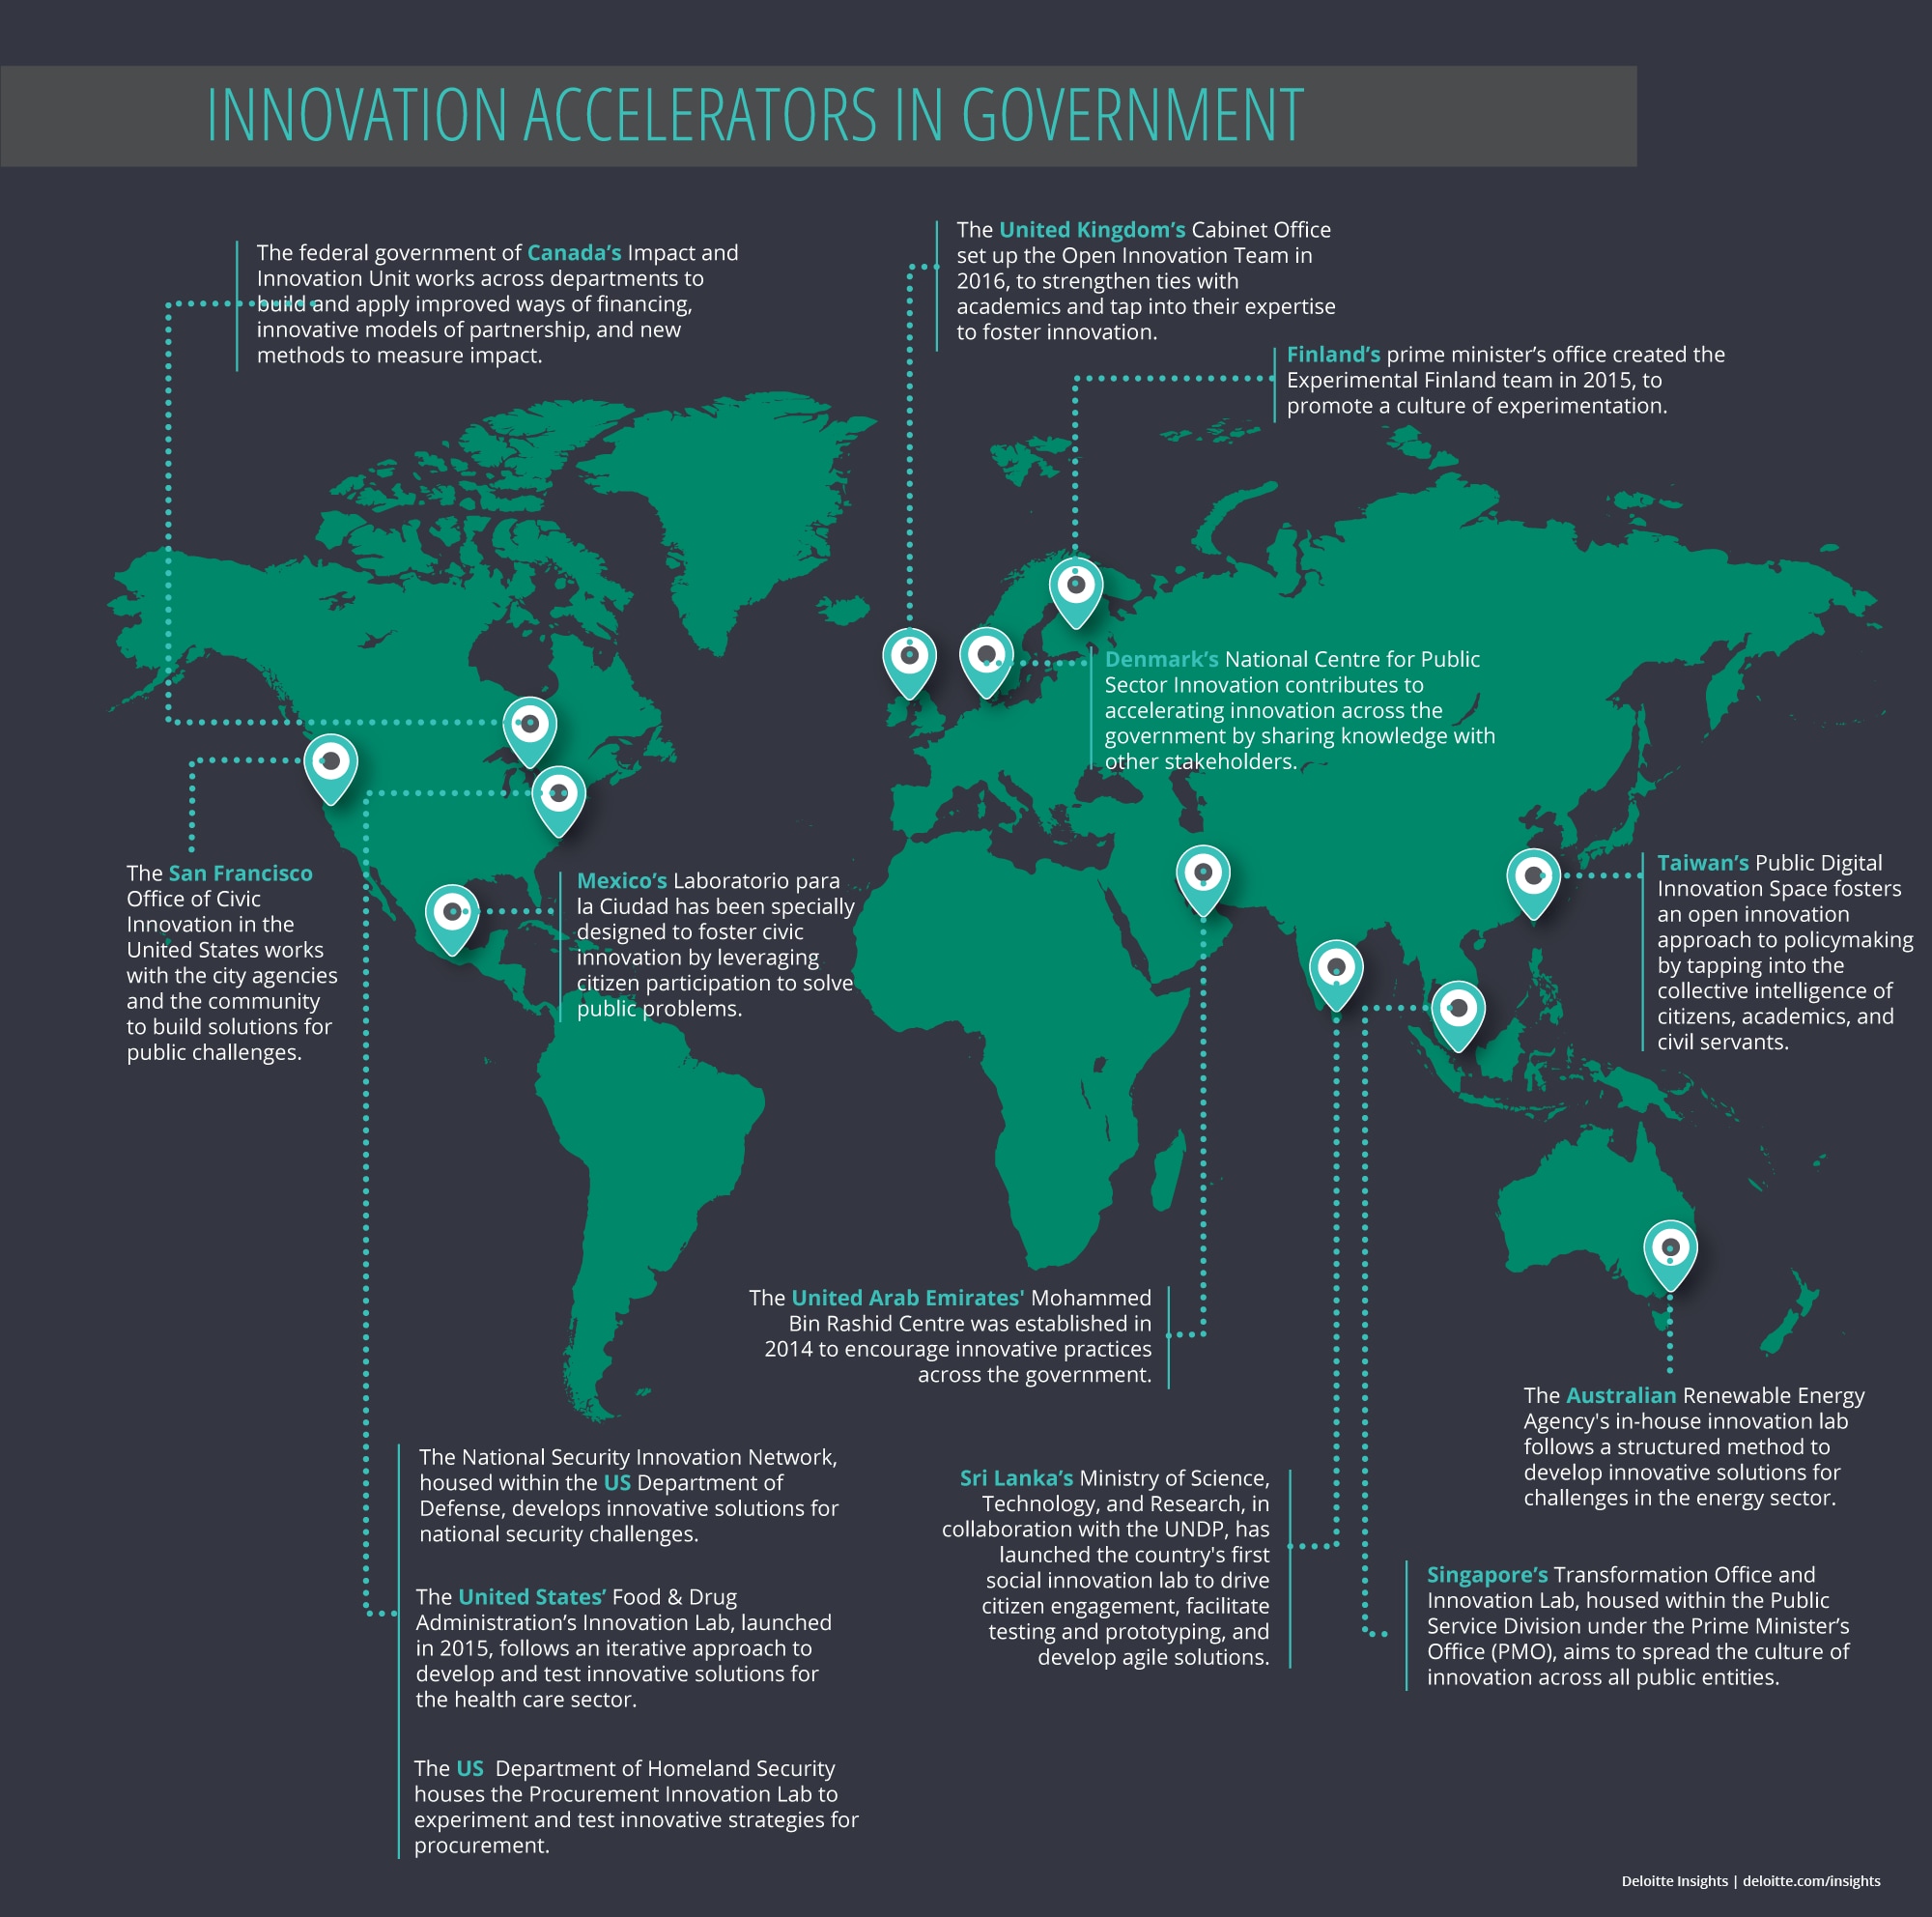 Innovation accelerators in government